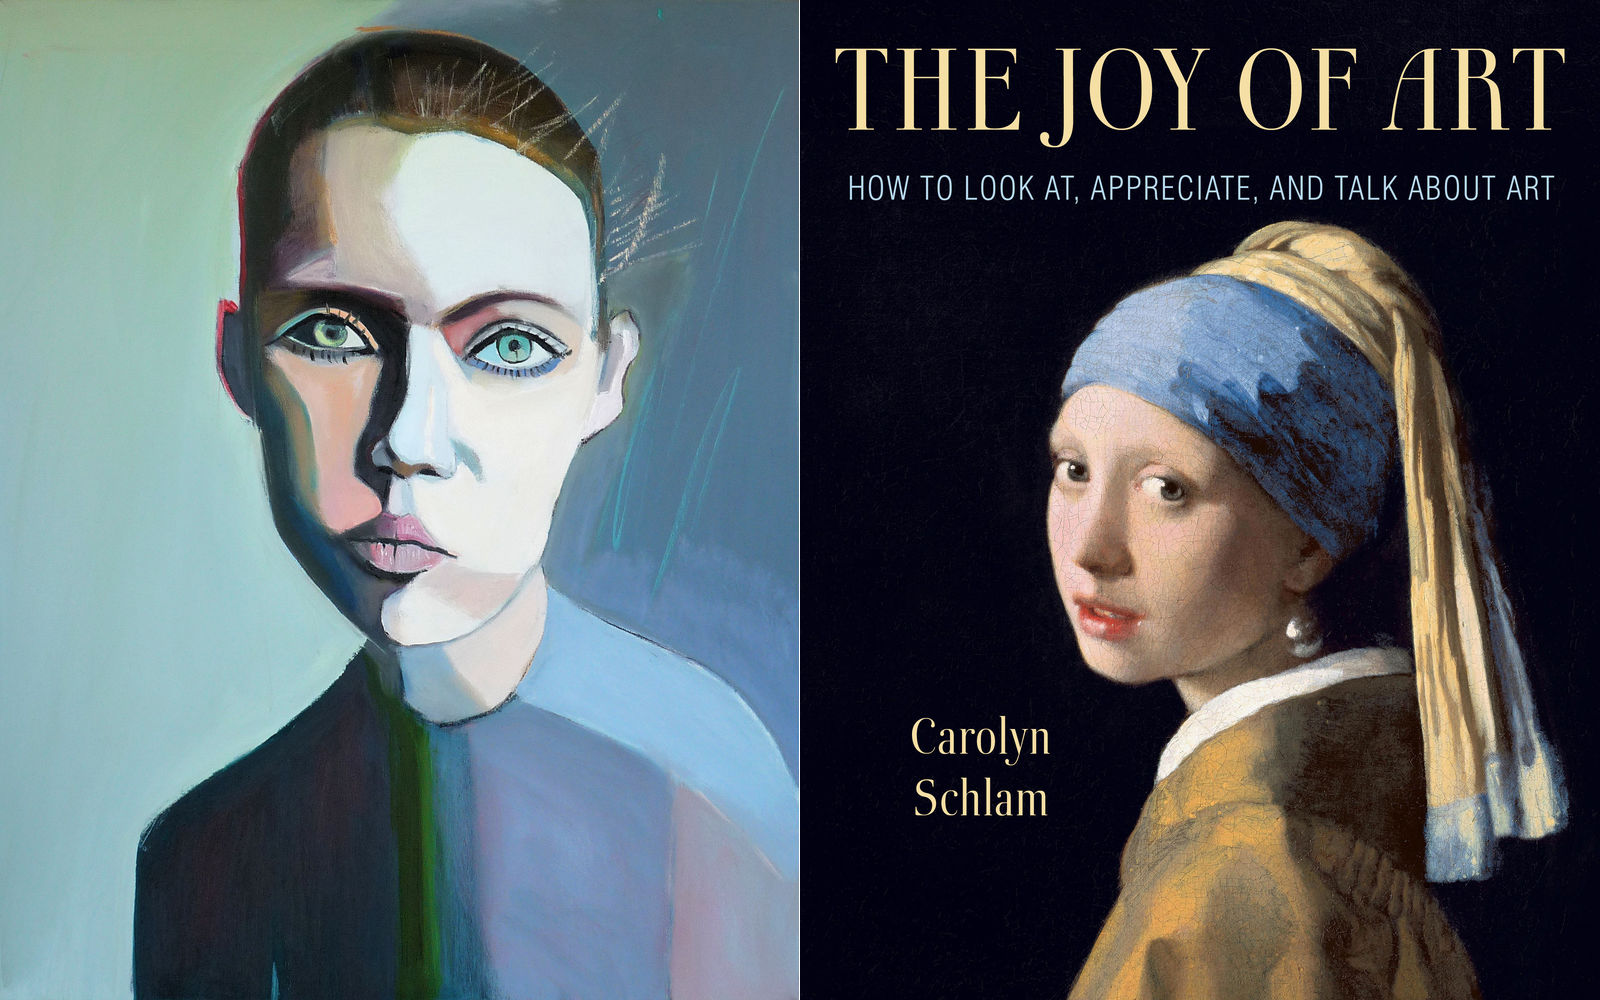 Girl with Green Eyes painting and The Joy of Art cover